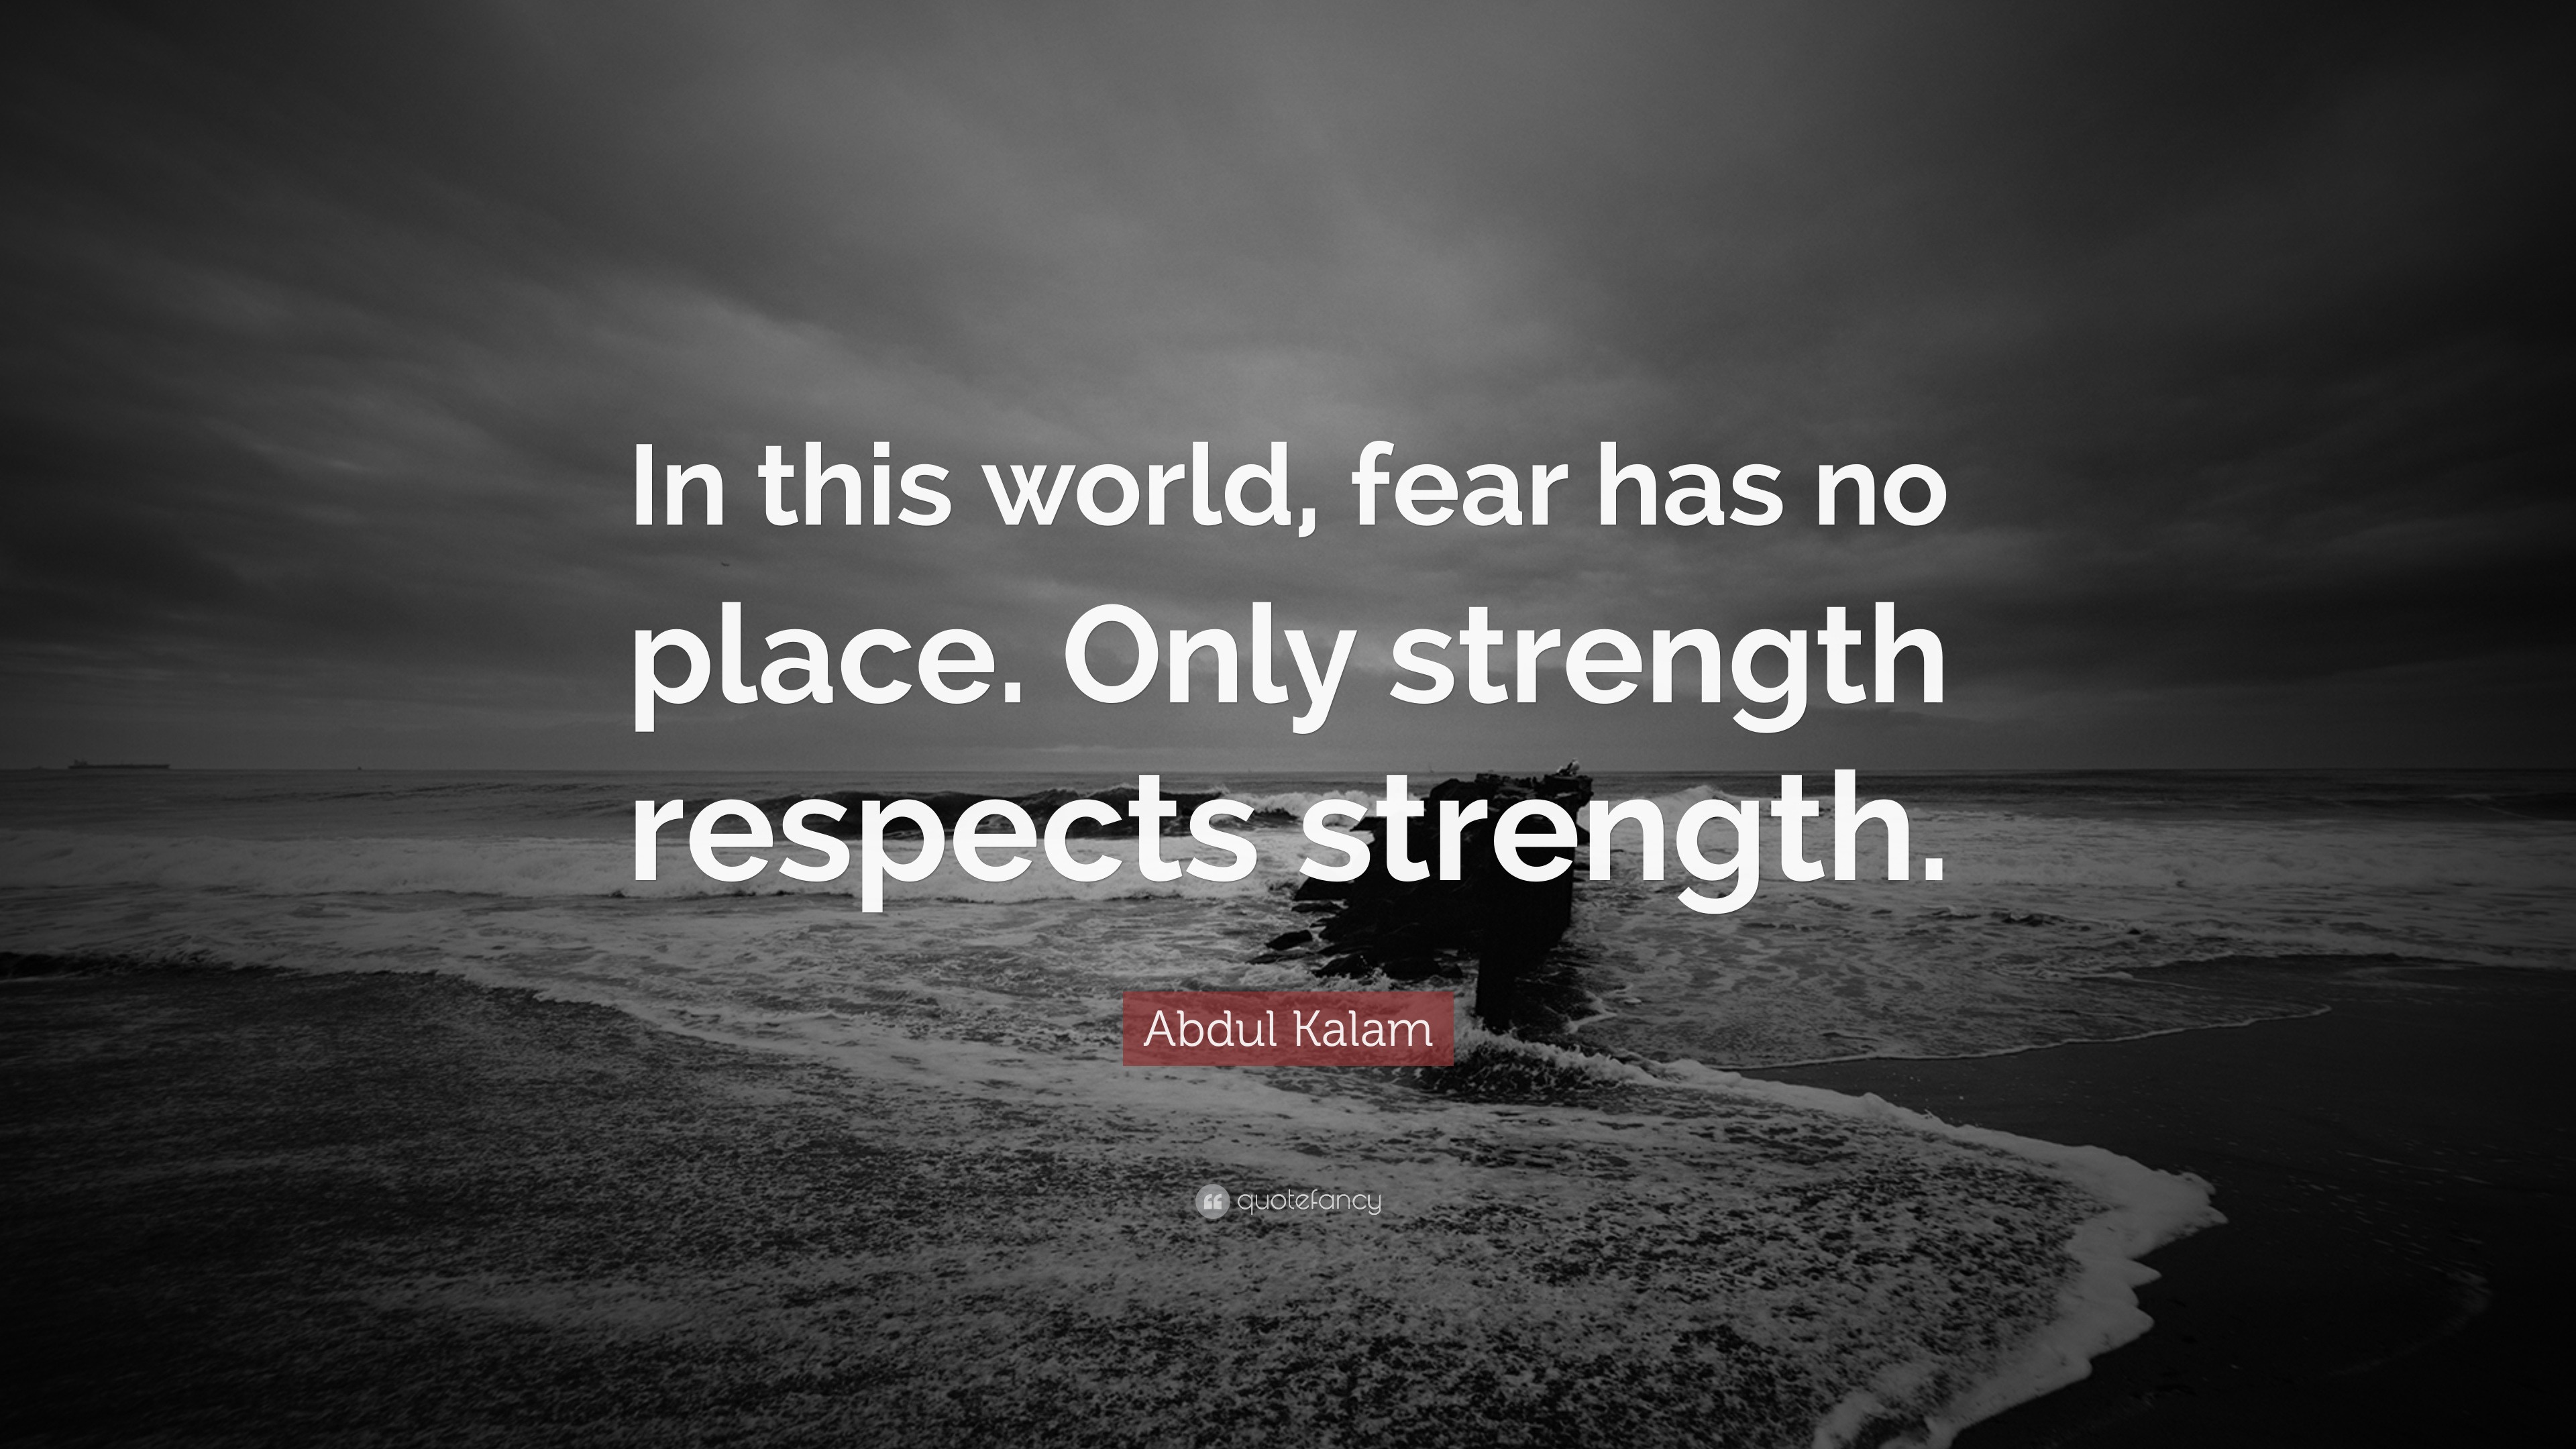 Abdul Kalam Quote “in This World Fear Has No Place Only